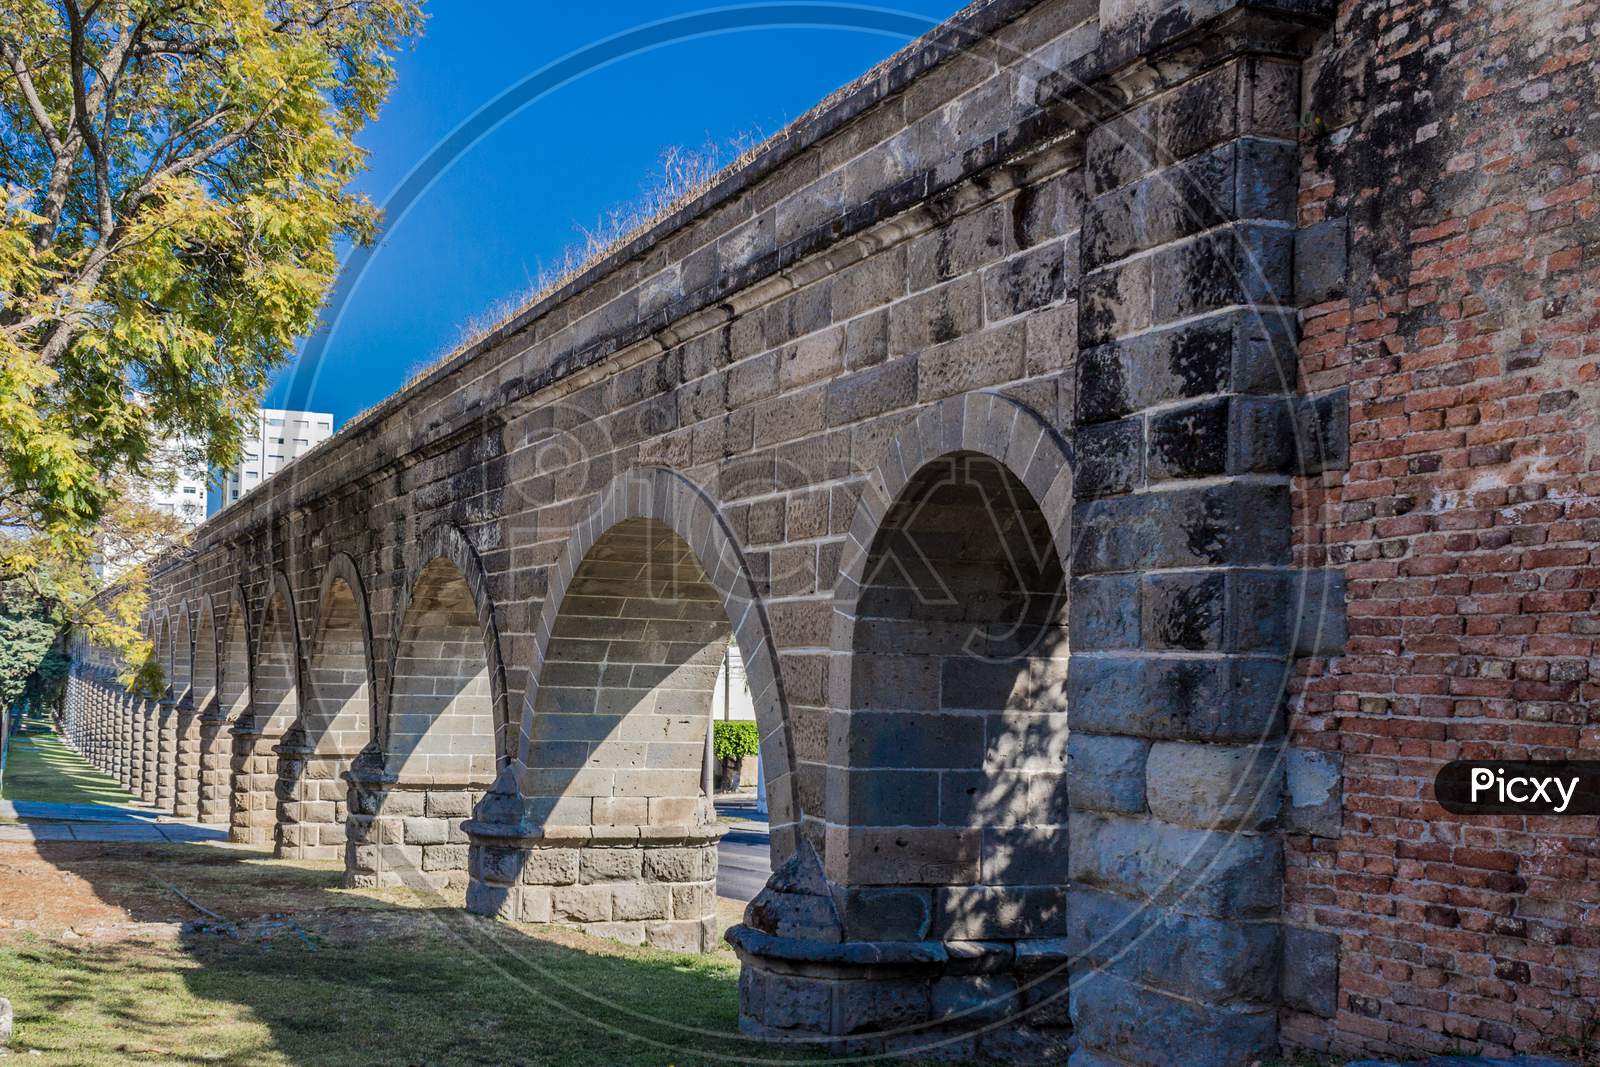 Arches Of A Stone Aqueduct On A Wonderful Sunny Day With A Blue Sky In Guadalajara Jalisco Mexico